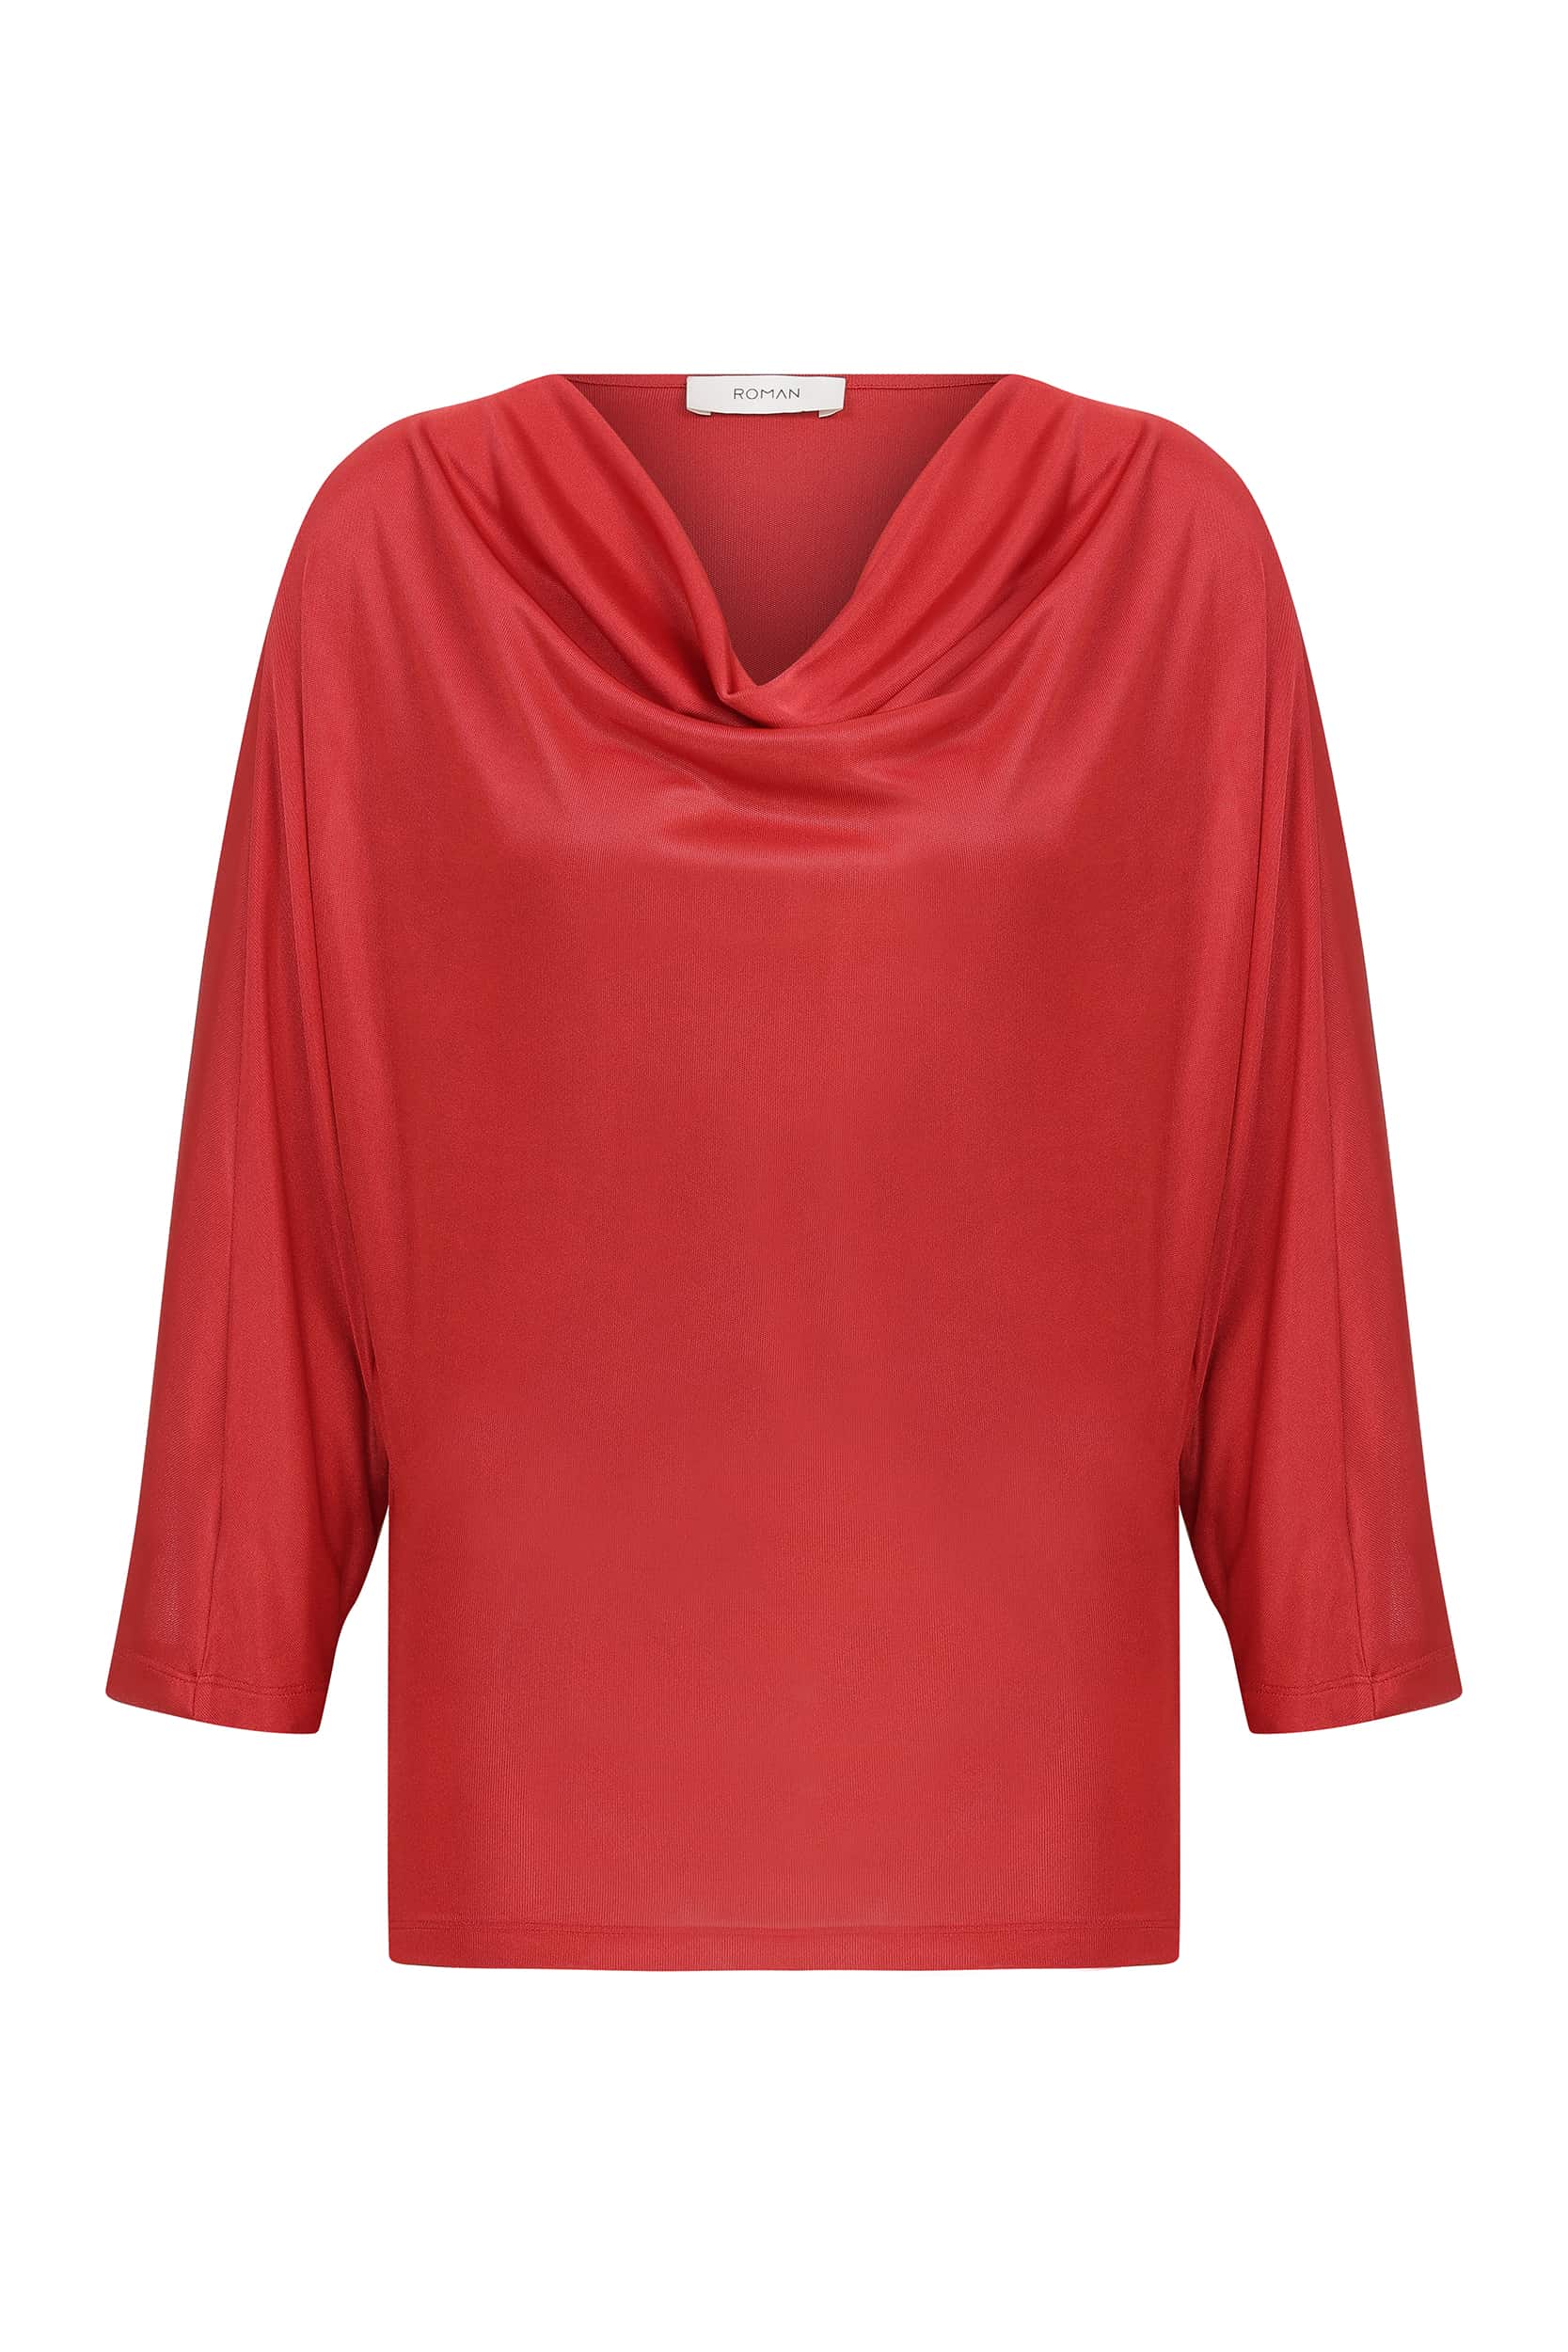 Cowl Neck Blouse ---[RED]